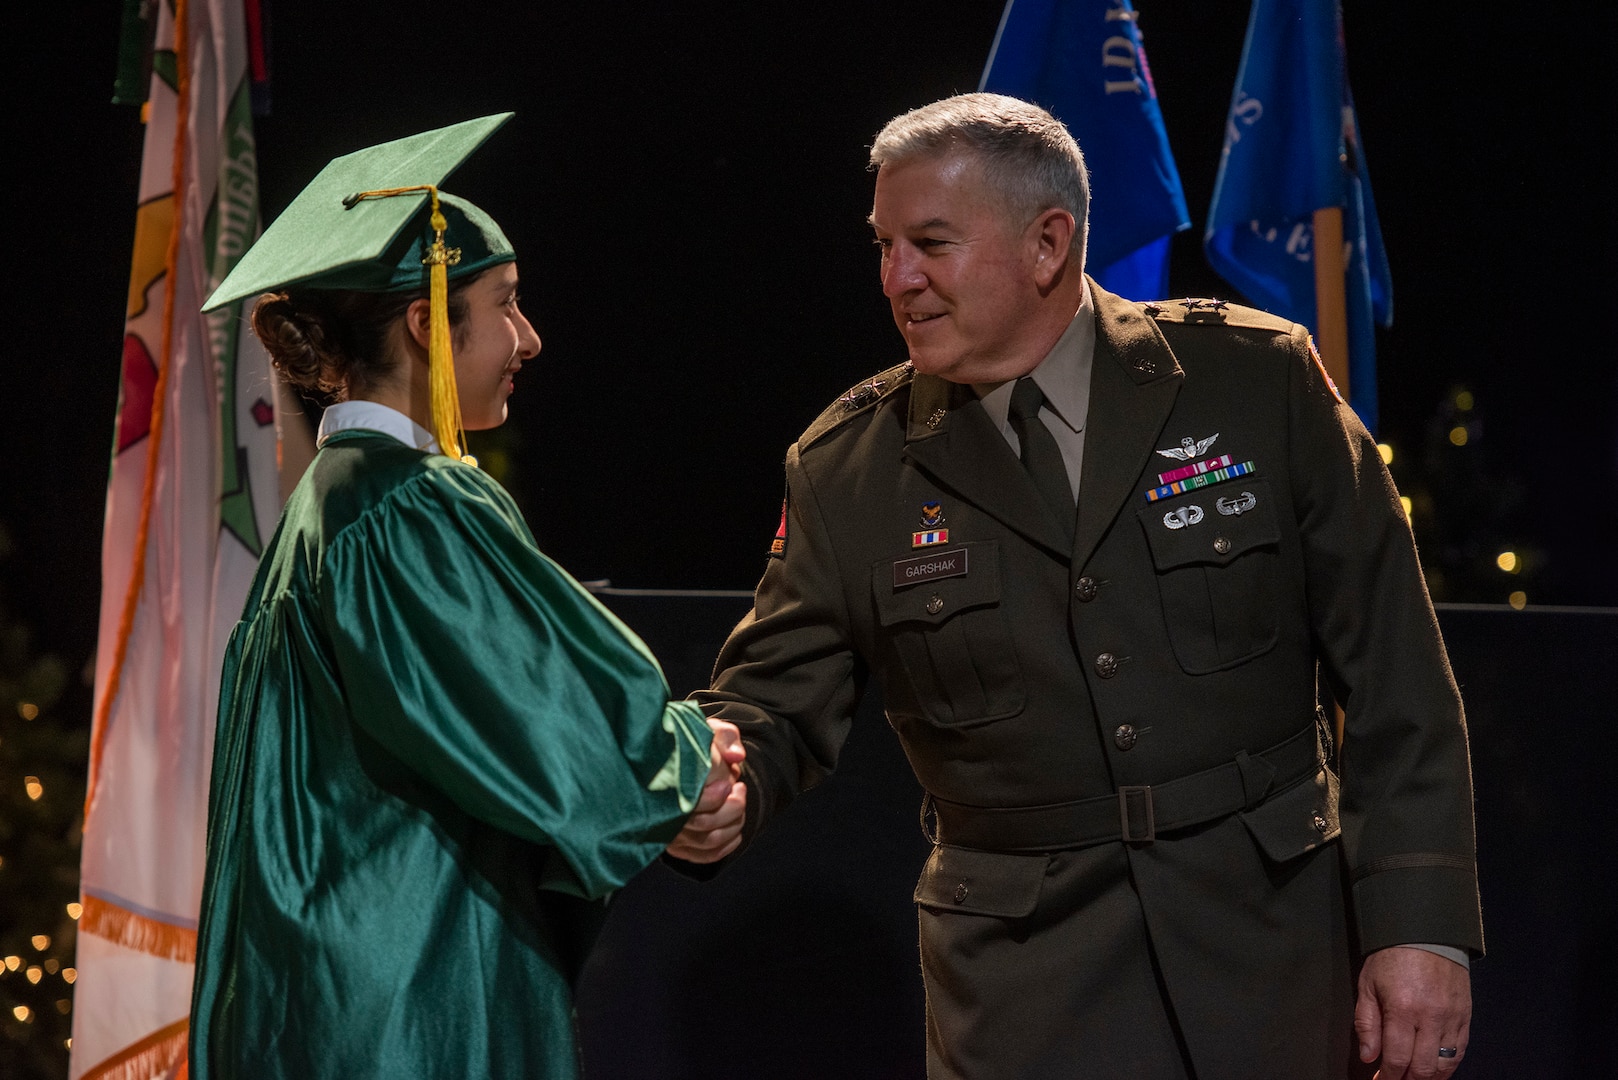 Maj. Gen. Michael Garshak, the adjutant general of Idaho and commander of the Idaho National Guard, congratulates one of 120 high school students who graduated from the Idaho Youth ChalleNGe Academy Dec. 16, 2023, in Boise, Idaho. The Department of Defense program provides second chances to at-risk teens.